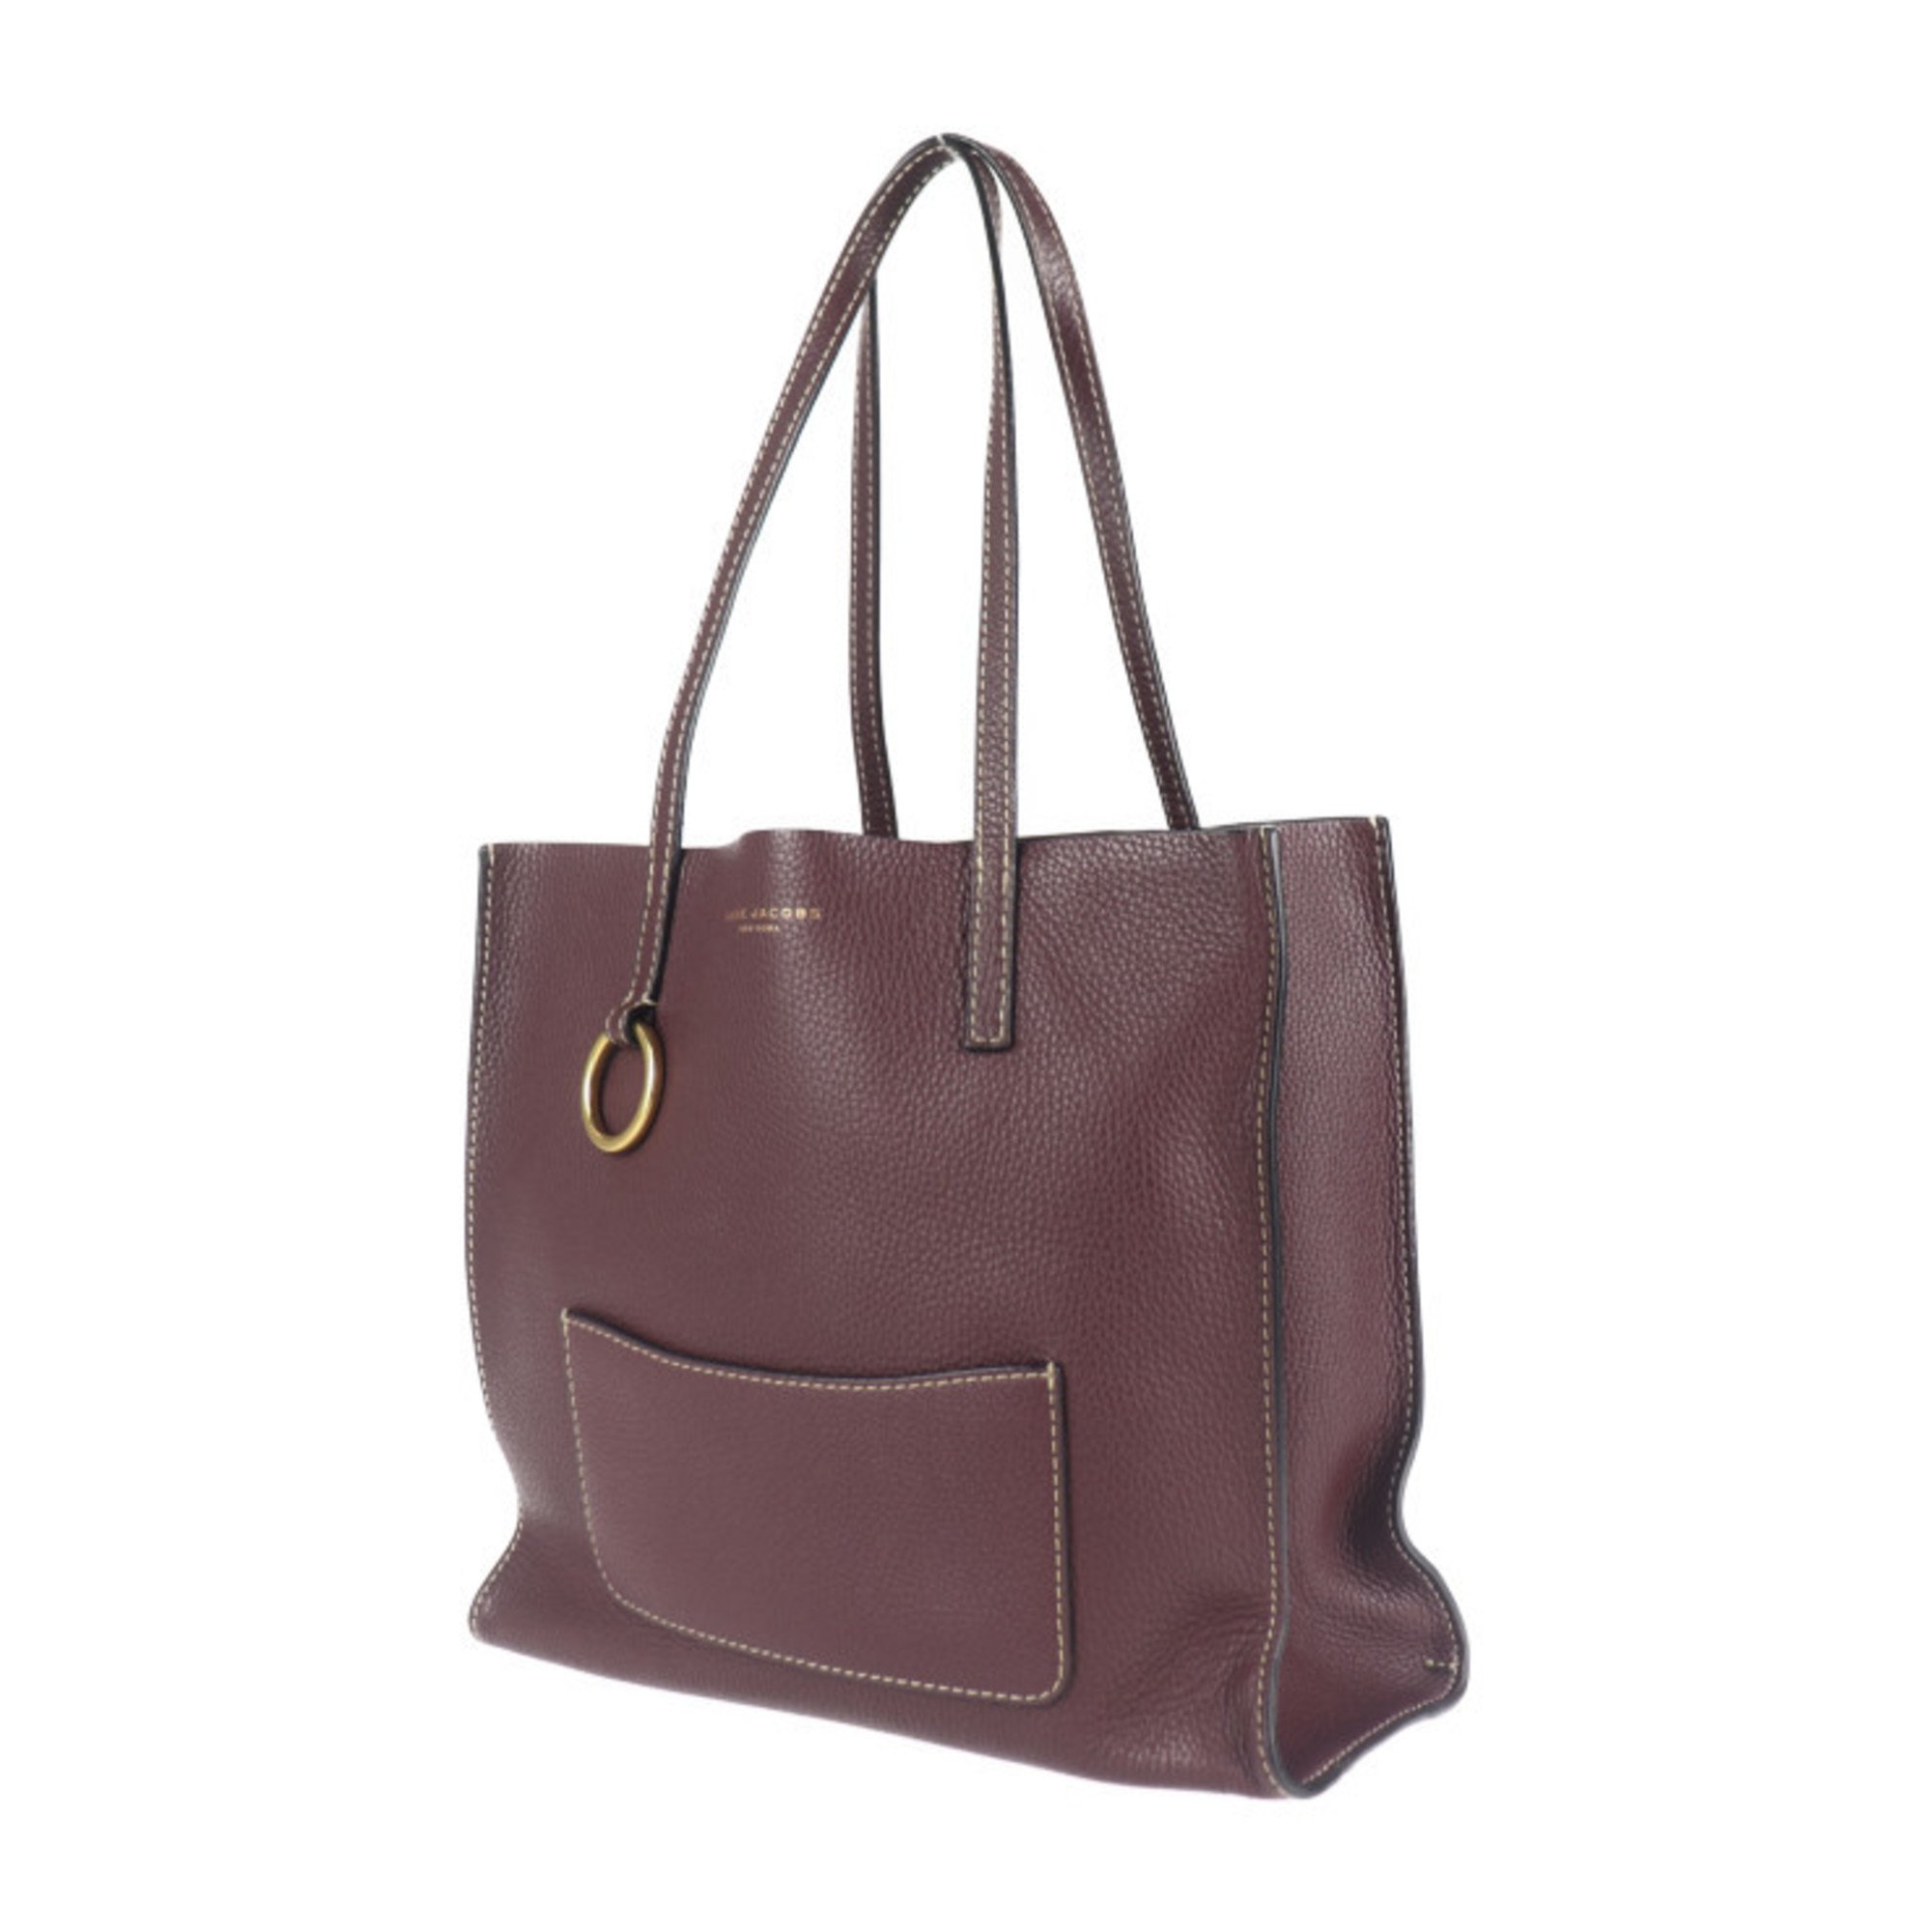 MARC JACOBS EW Shopper The Bold Grind Tote Bag M0012566 Leather Burgundy Wine Gold Hardware Shoulder with Pouch